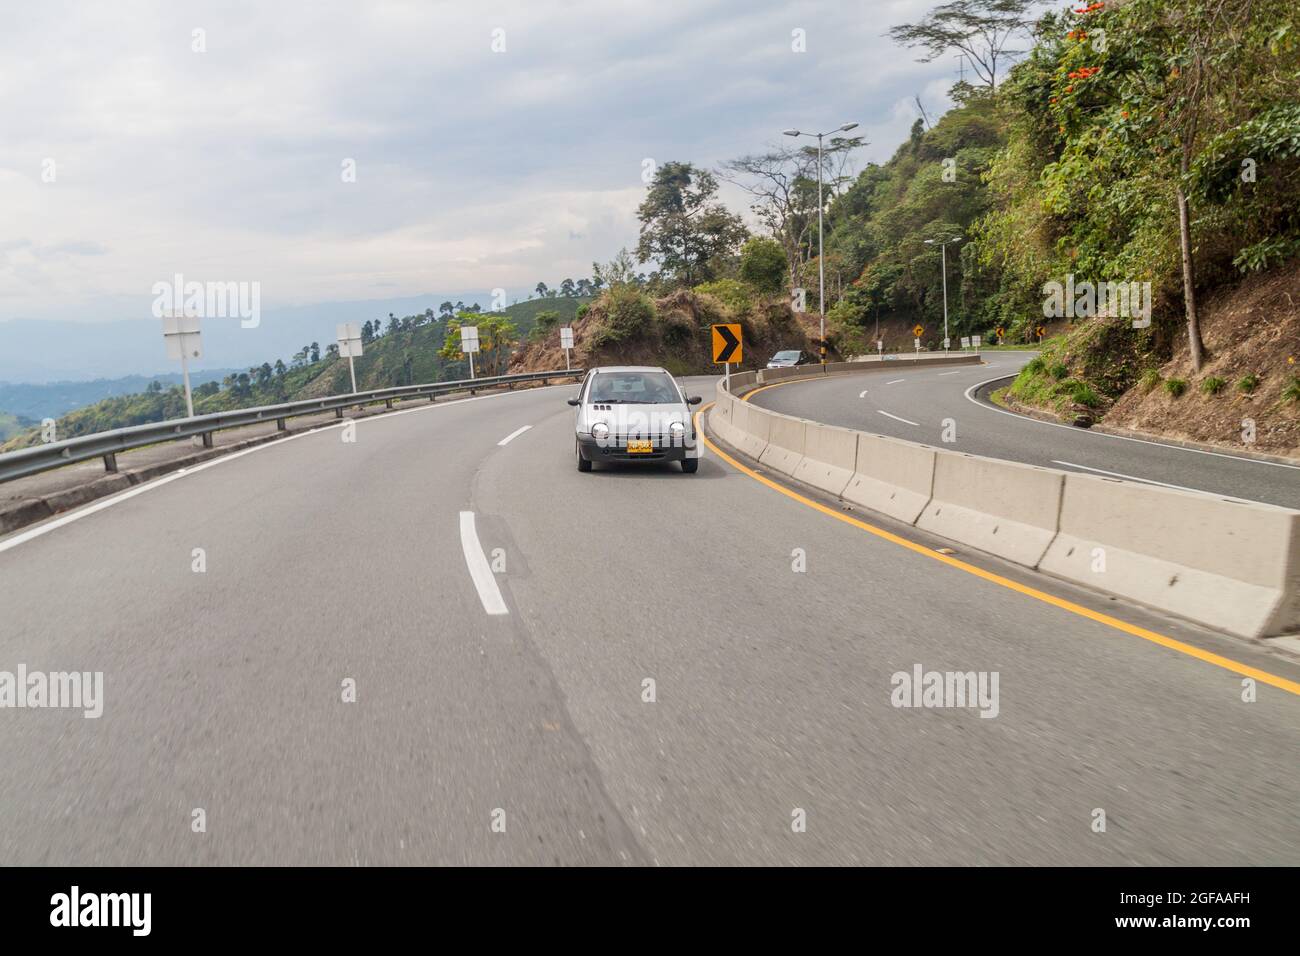 MANIZALES, COLOMBIA - SEPTEMBER 6, 2105: Traffic on Autopista del Cafe (Coffee Highway) connecting important coffee production areas in Colombia. Stock Photo